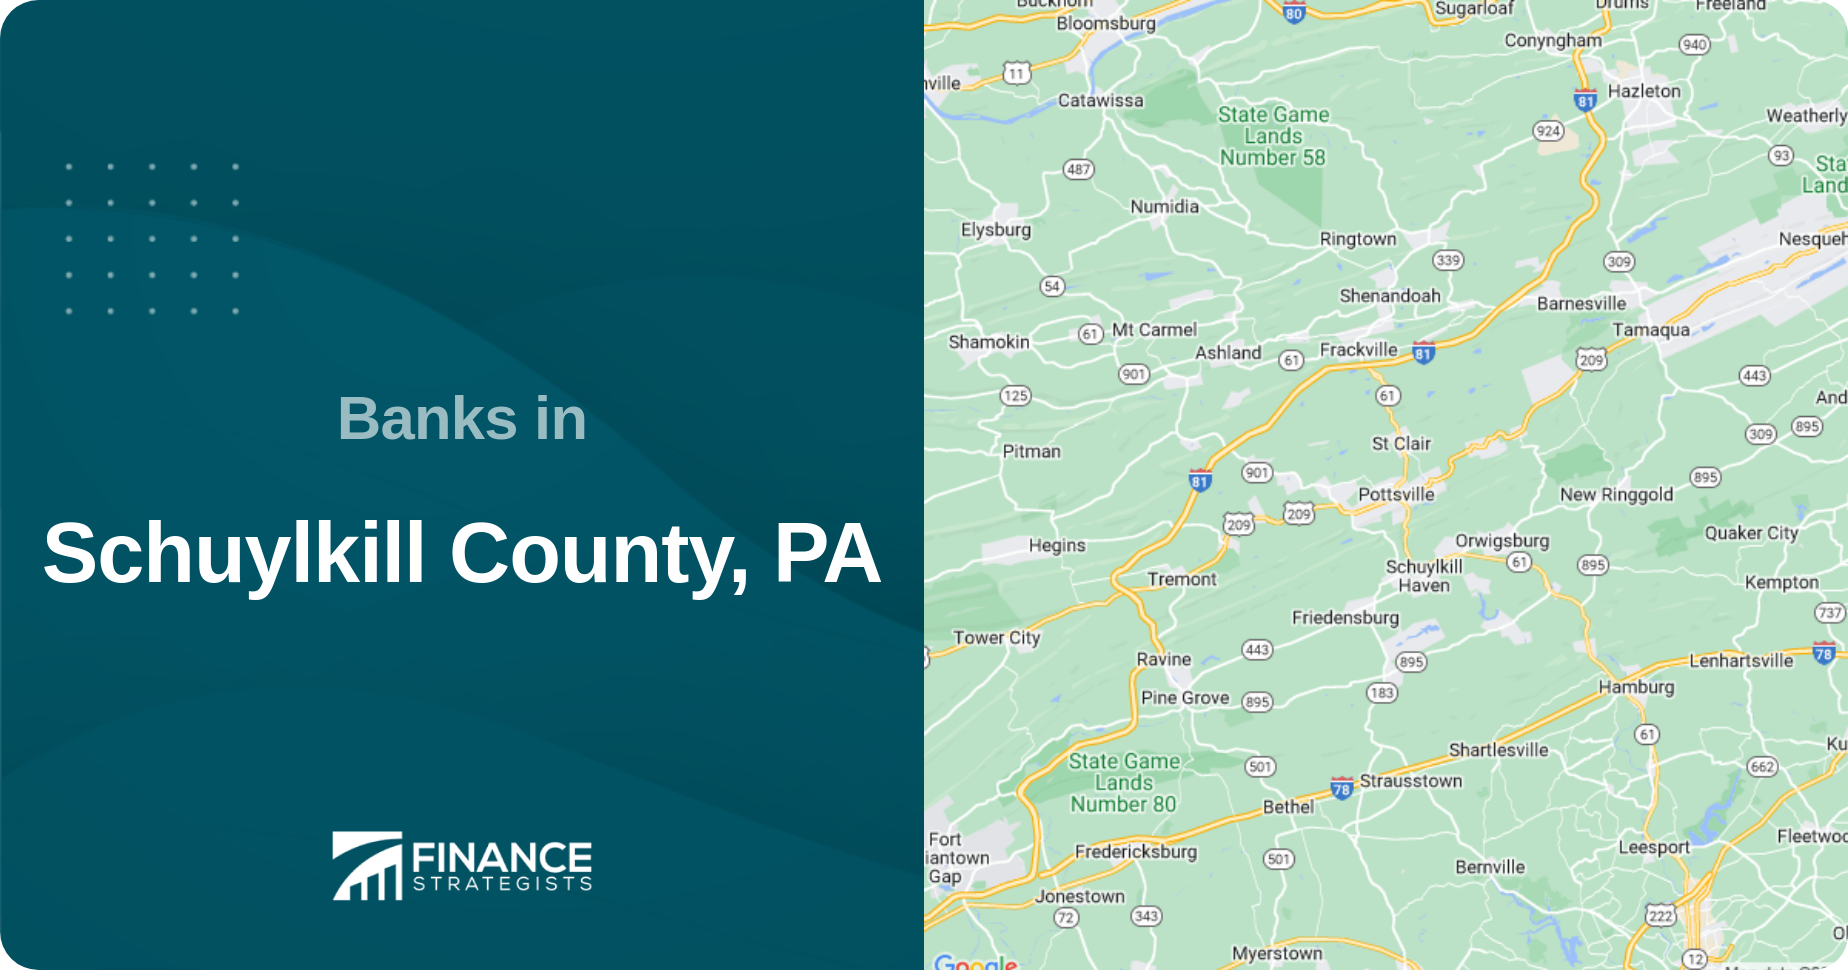 Banks in Schuylkill County, PA